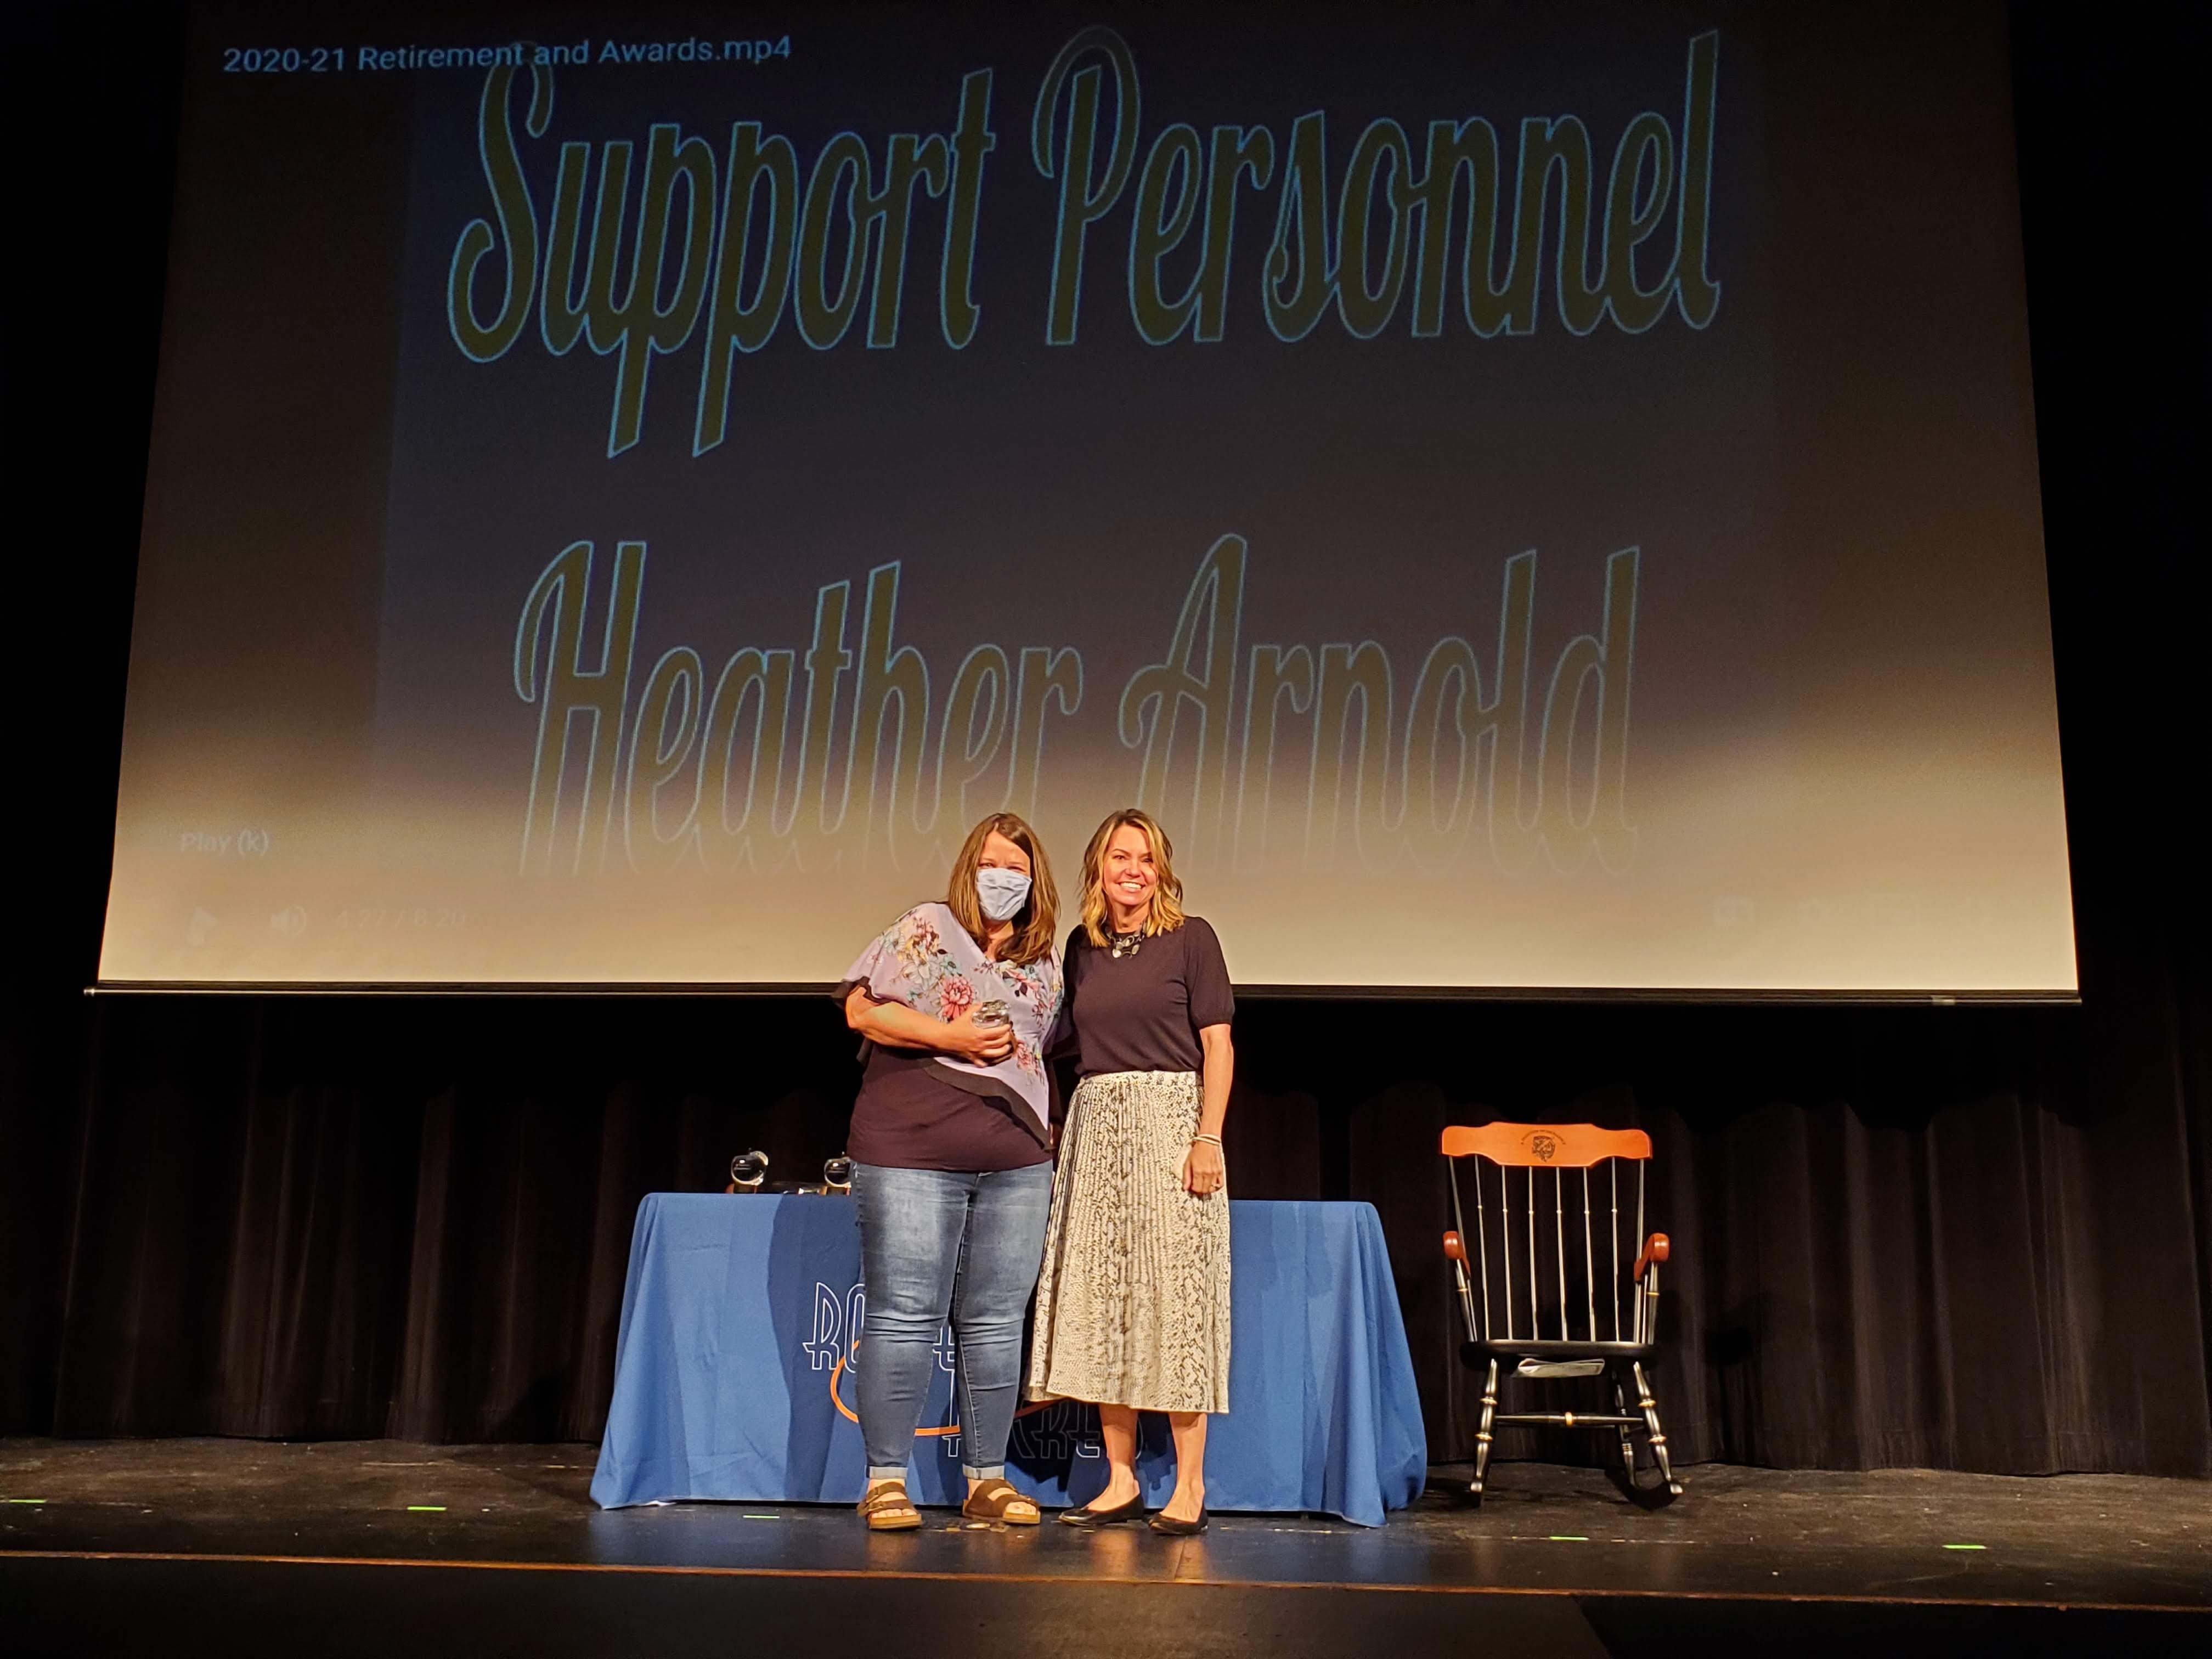 Support Staff of the Year